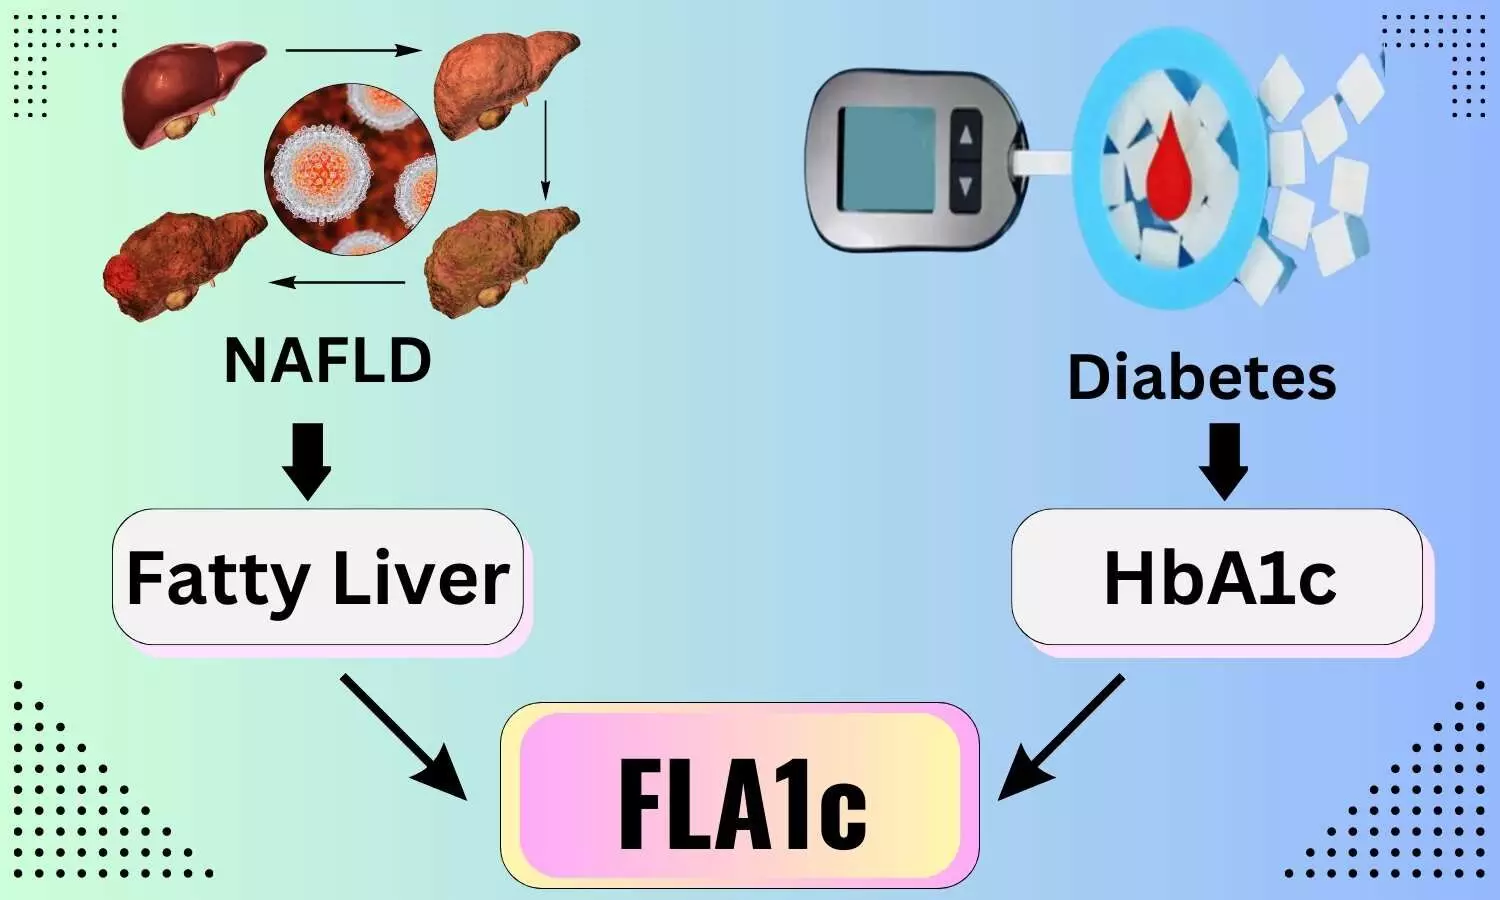 A Novel Therapeutic Approach for Managing Hidden Epidemic of FLA1c in Patients with T2DM